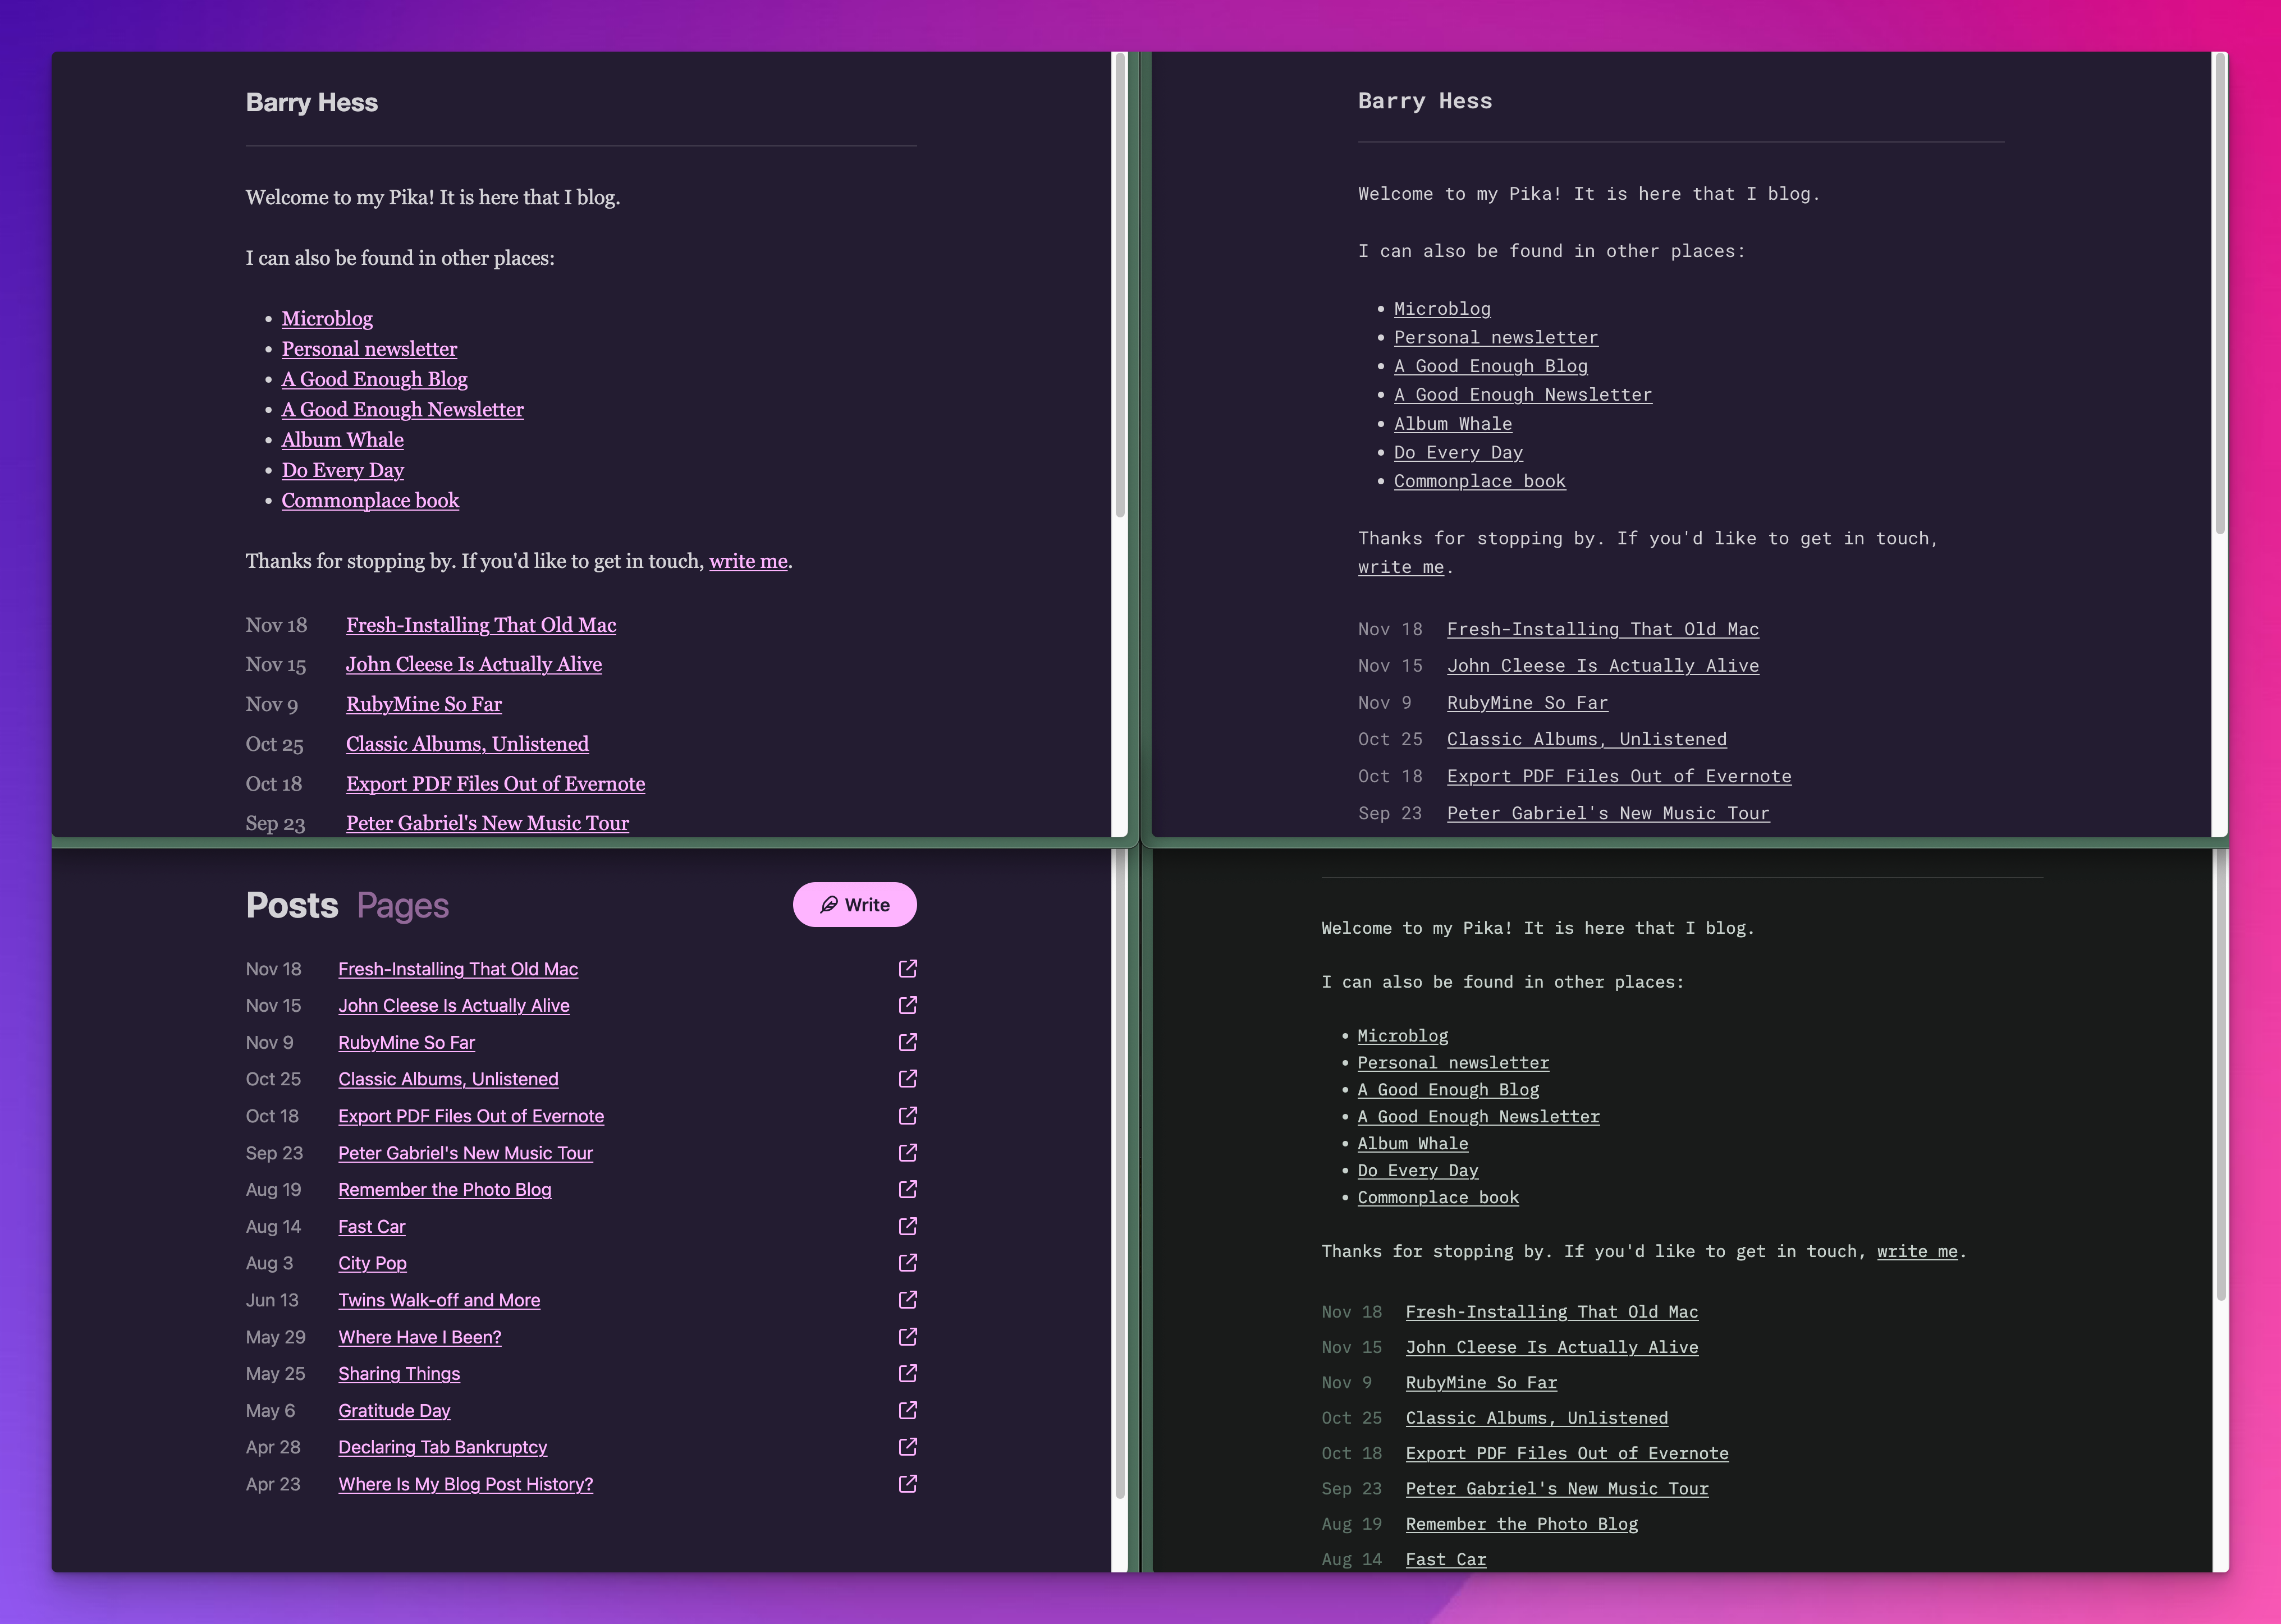 Screenshots of an upcoming blog software by Good Enough. In dark mode.